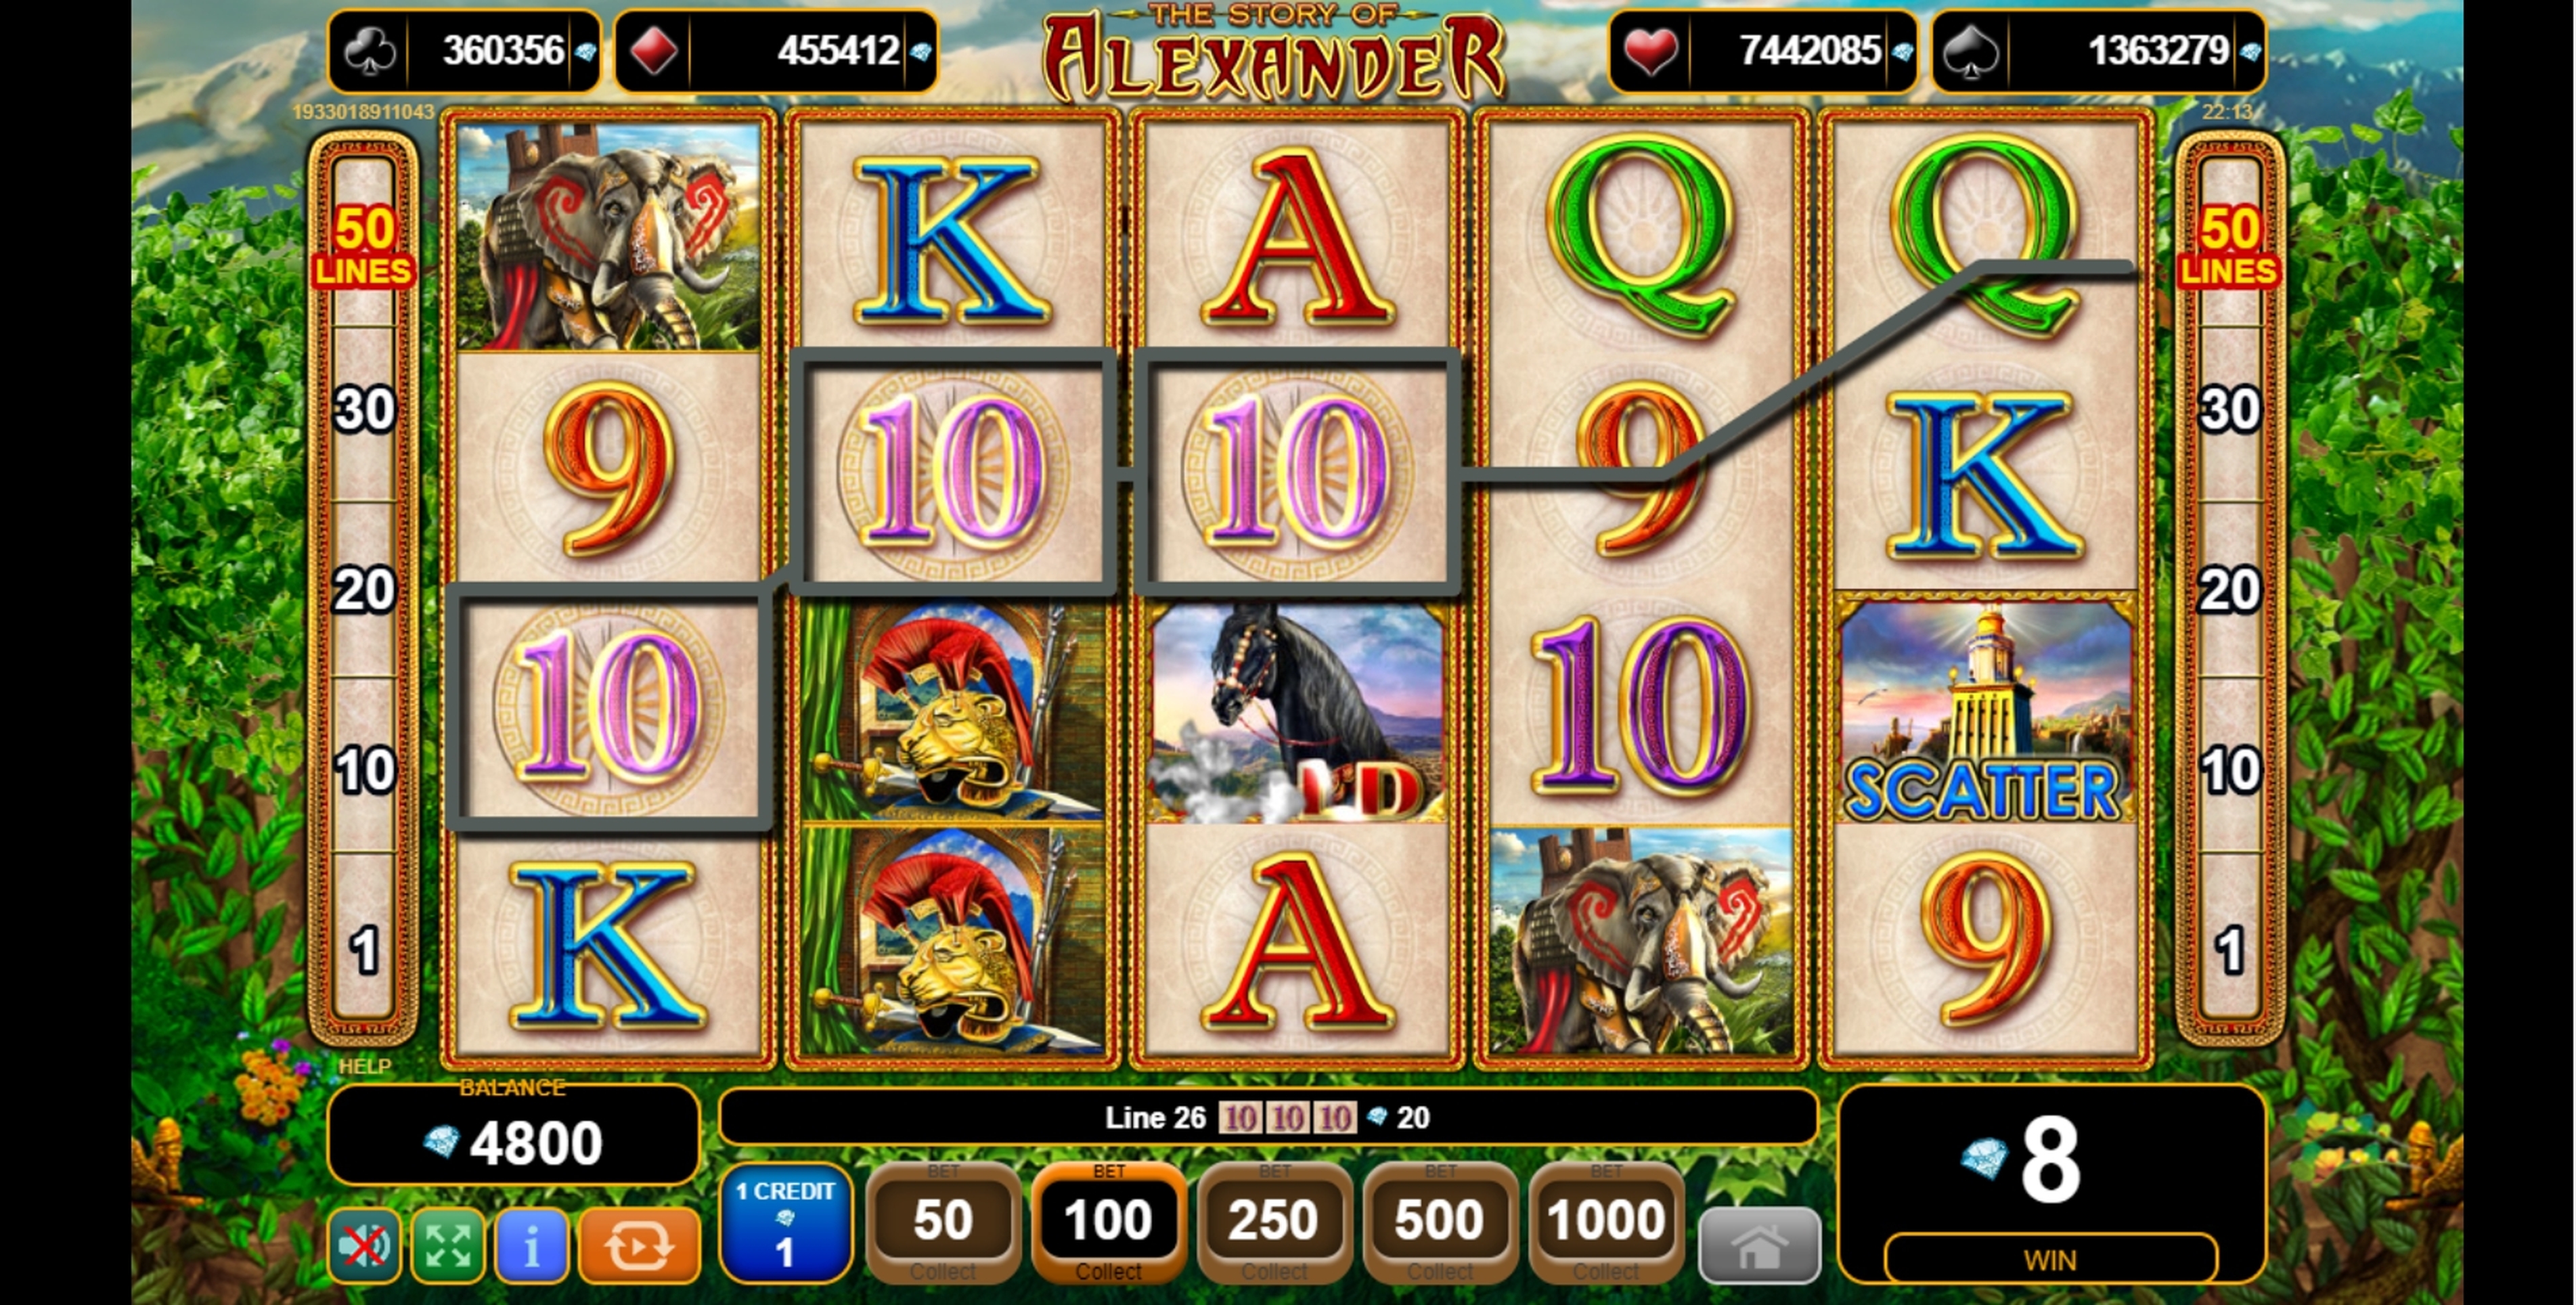 Win Money in The Story of Alexander Free Slot Game by EGT